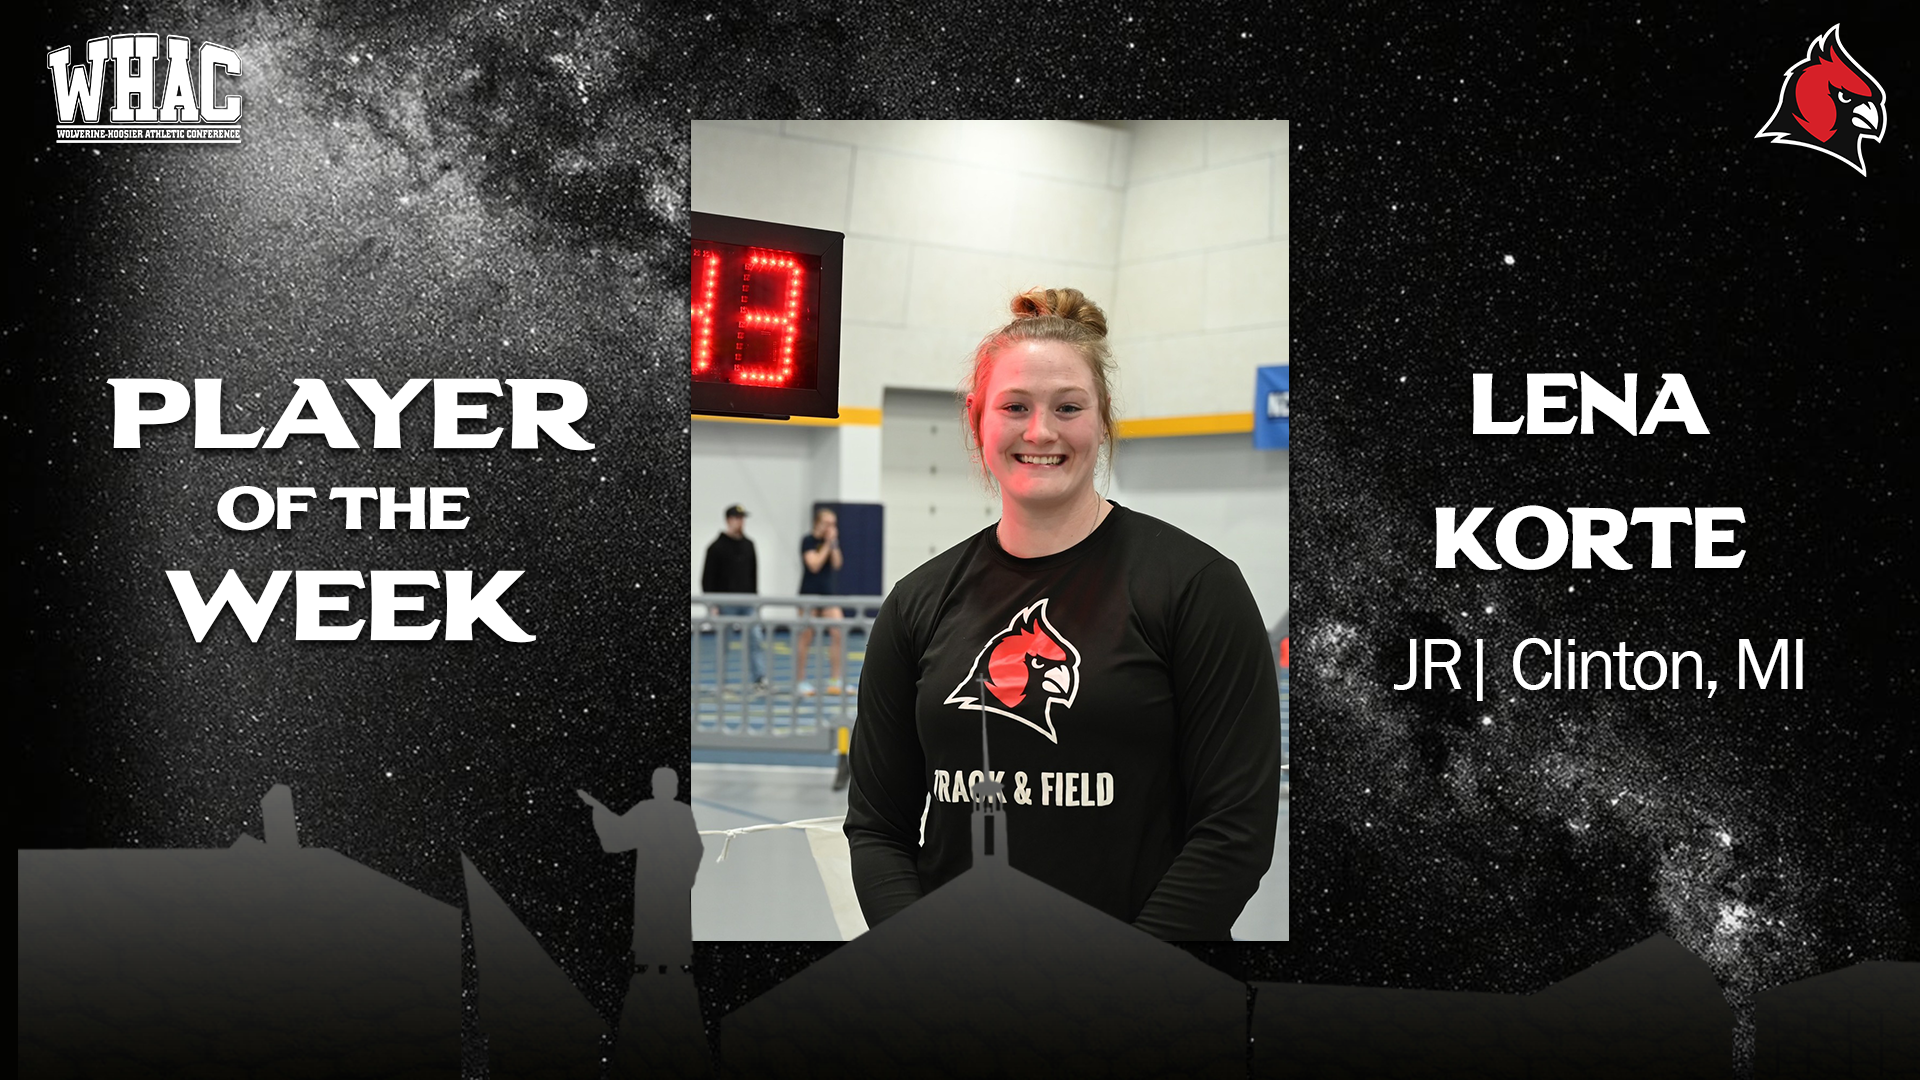 Korte earns fifth WHAC Player of the Week honors of the season